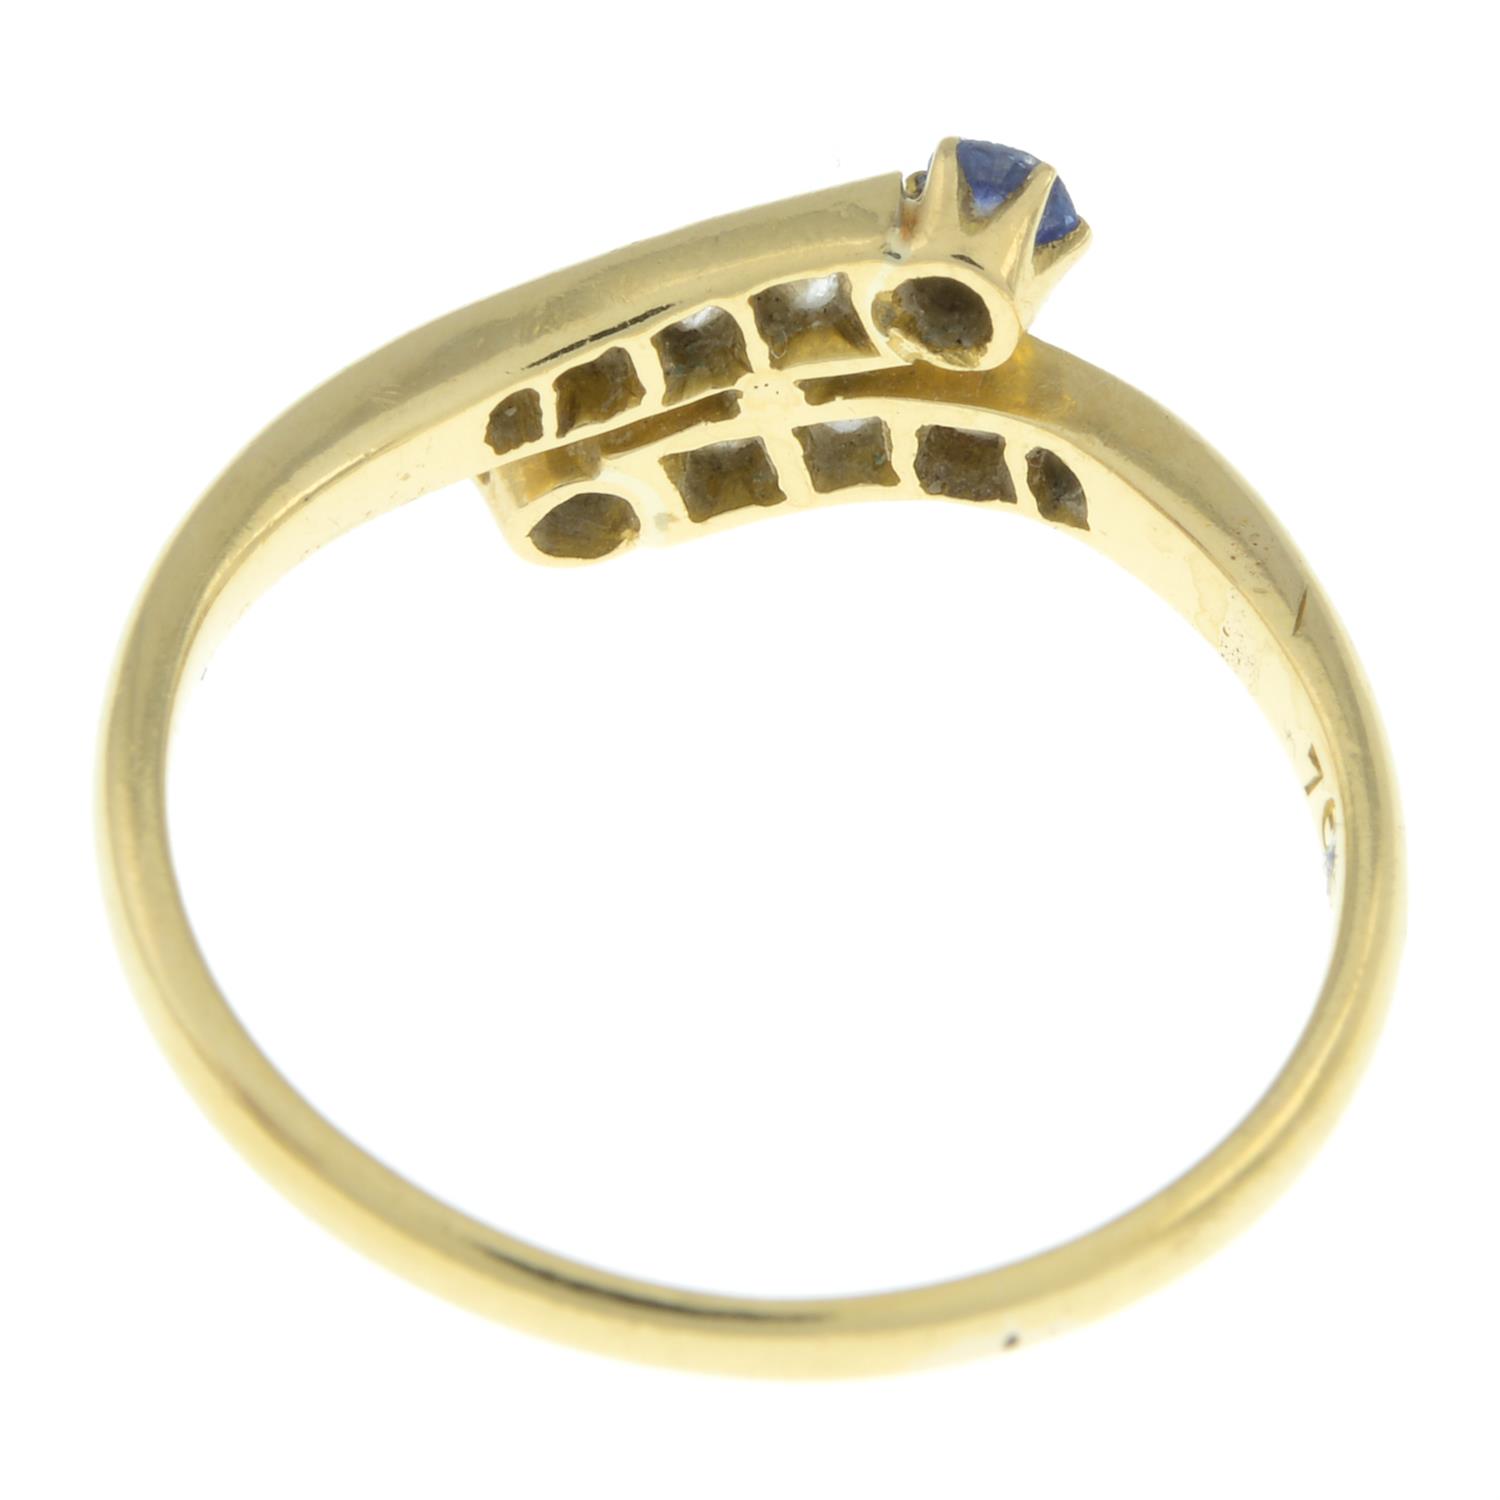 Late Victorian 18ct gold sapphire & diamond crossover ring - Image 2 of 2